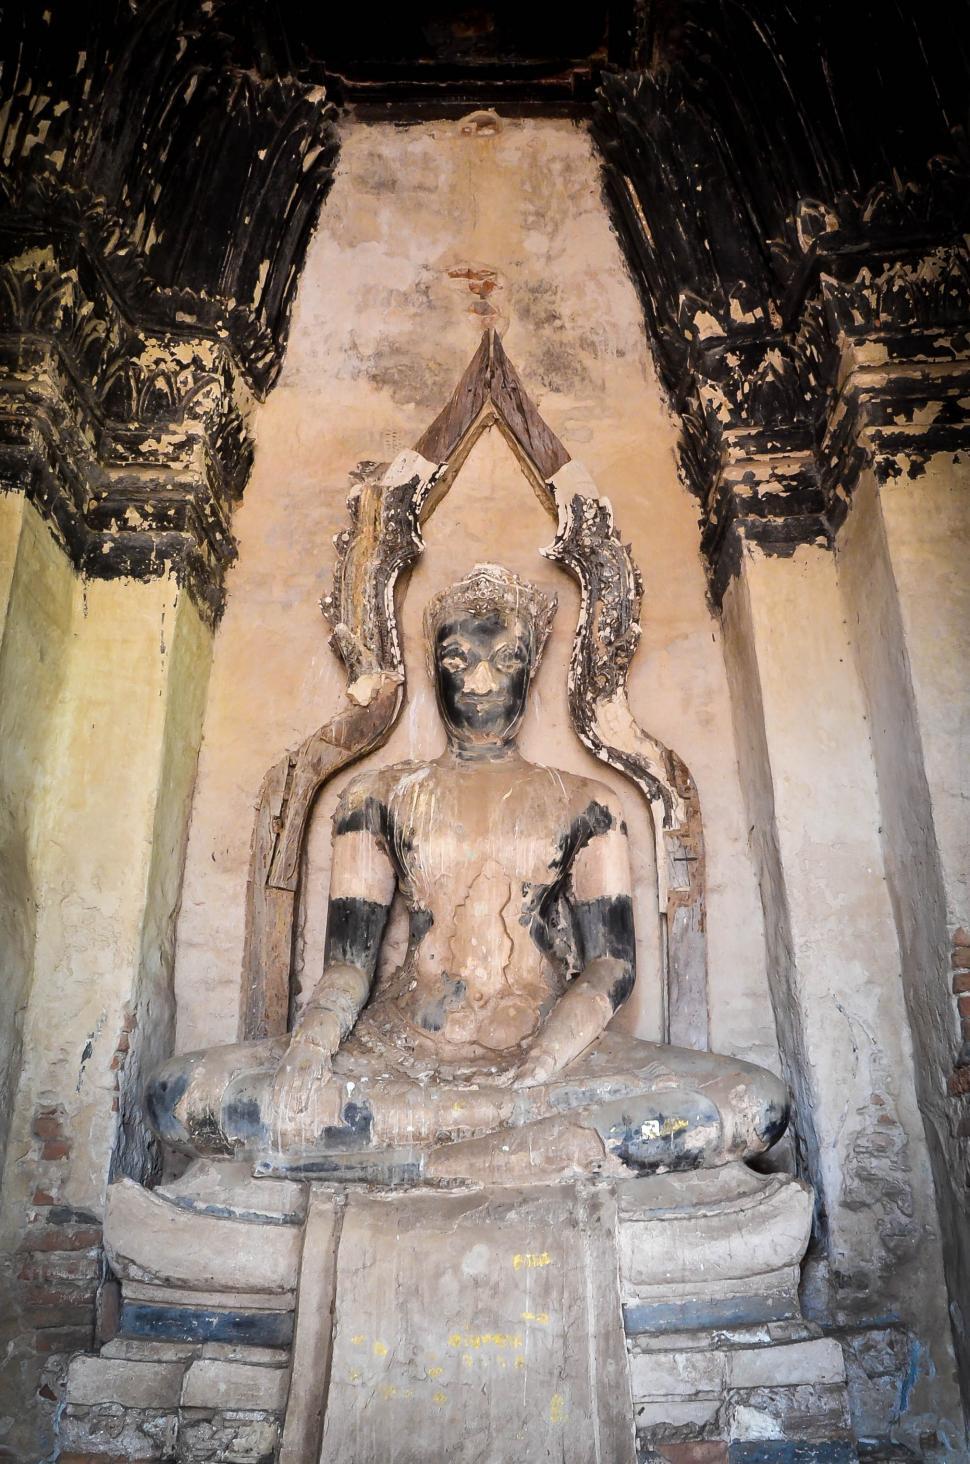 Free Image of Buddha Statue in Crumbling Ruins 